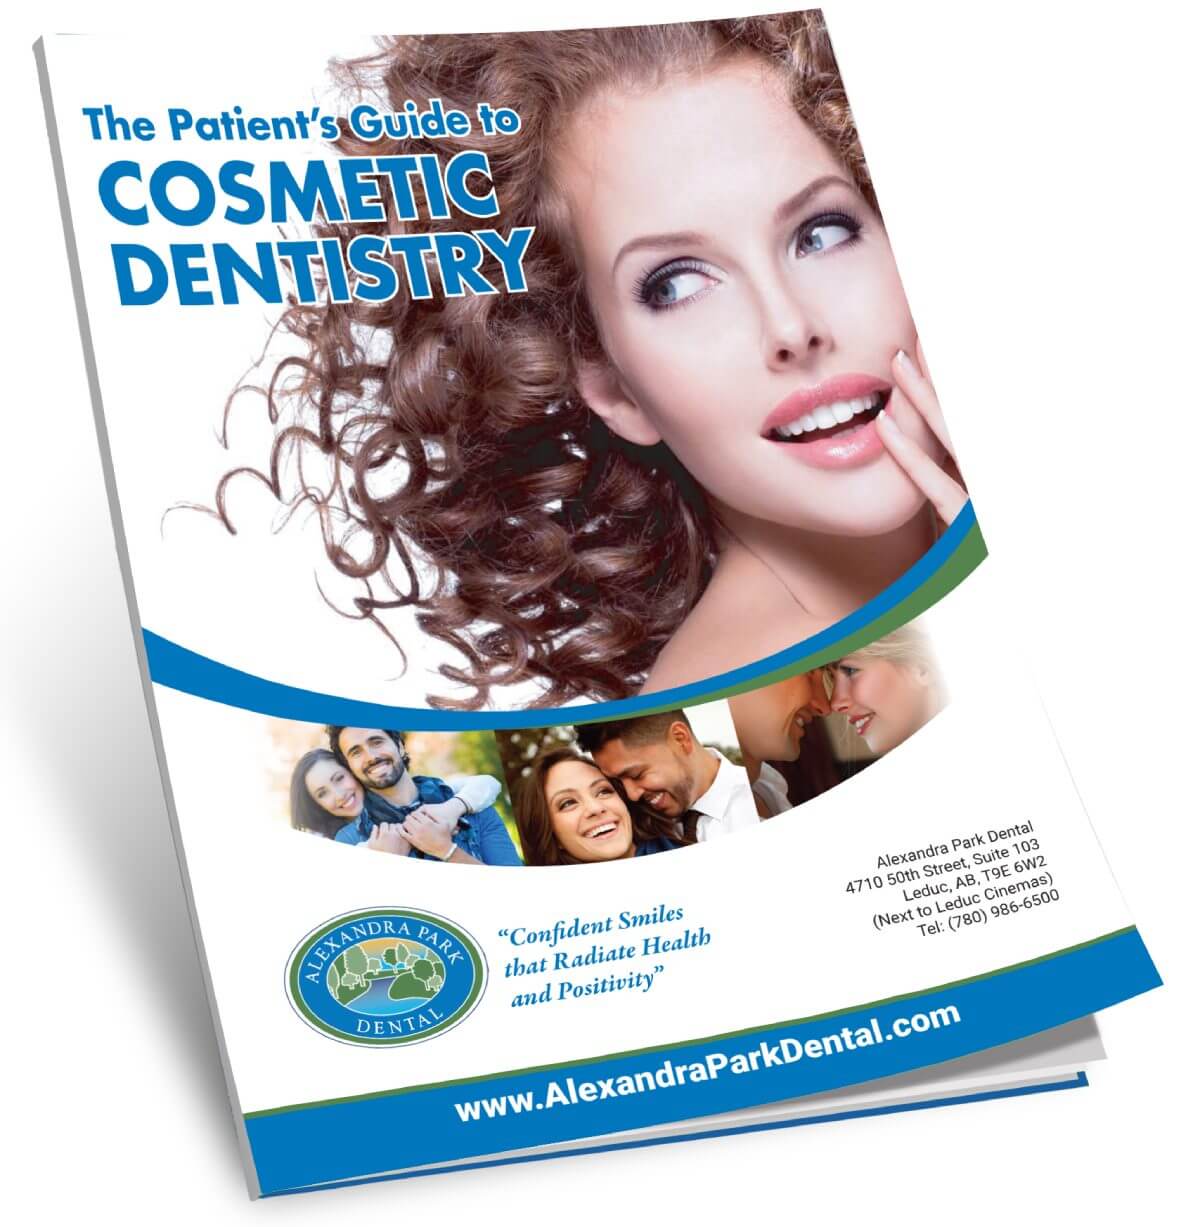 Booklet on guiding you through Cosmetic Dentistry